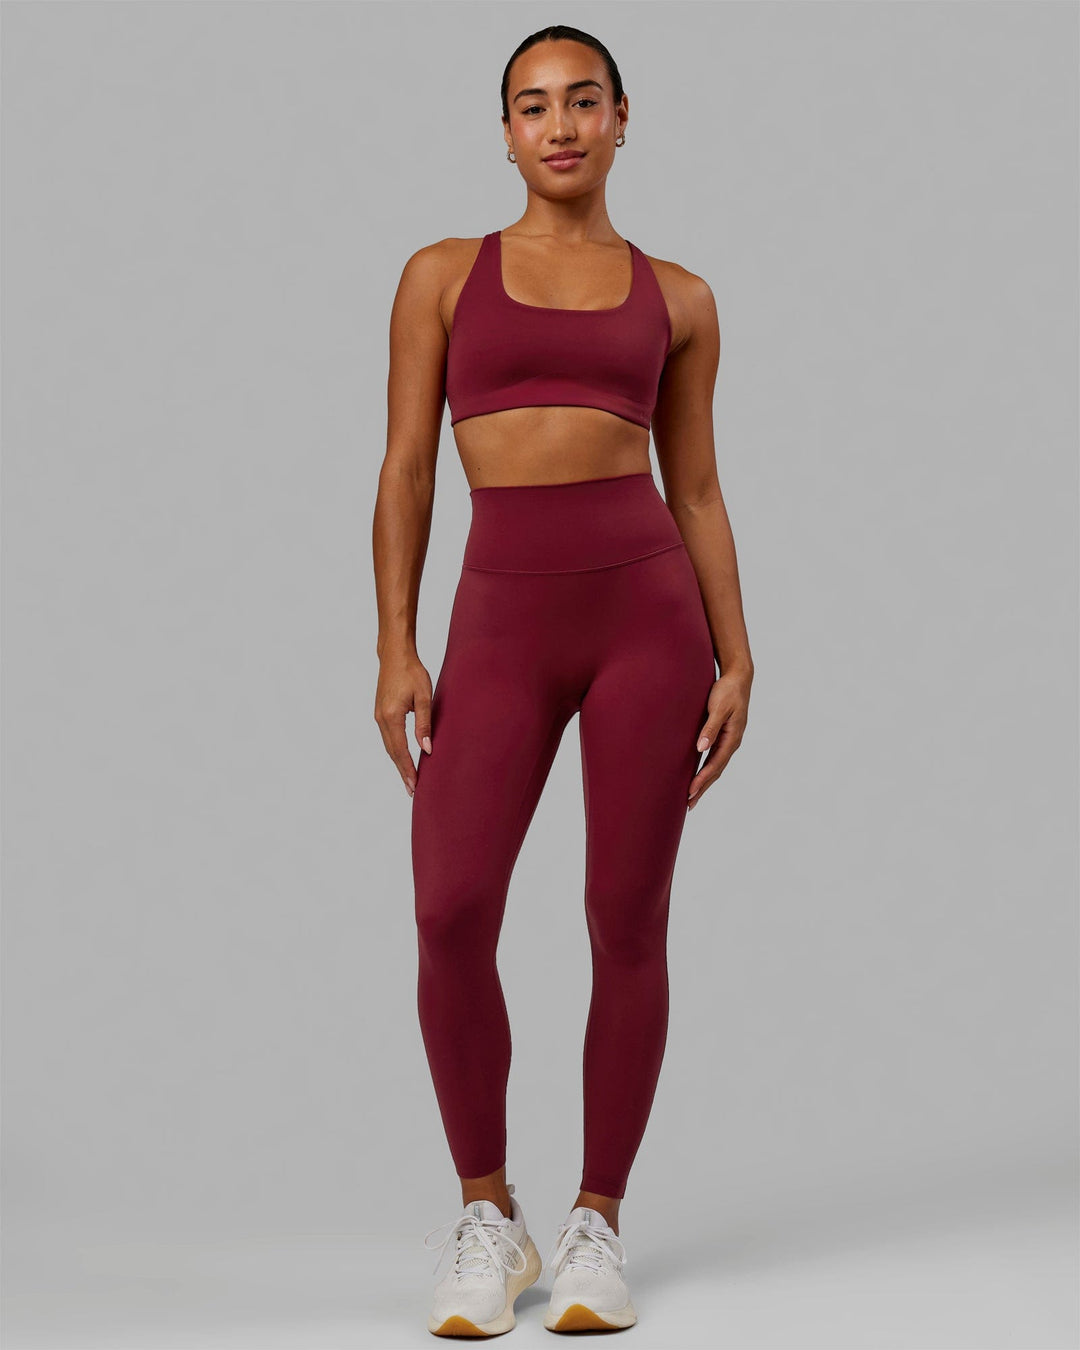 Woman wearing Elixir Full Length Tights - Cranberry